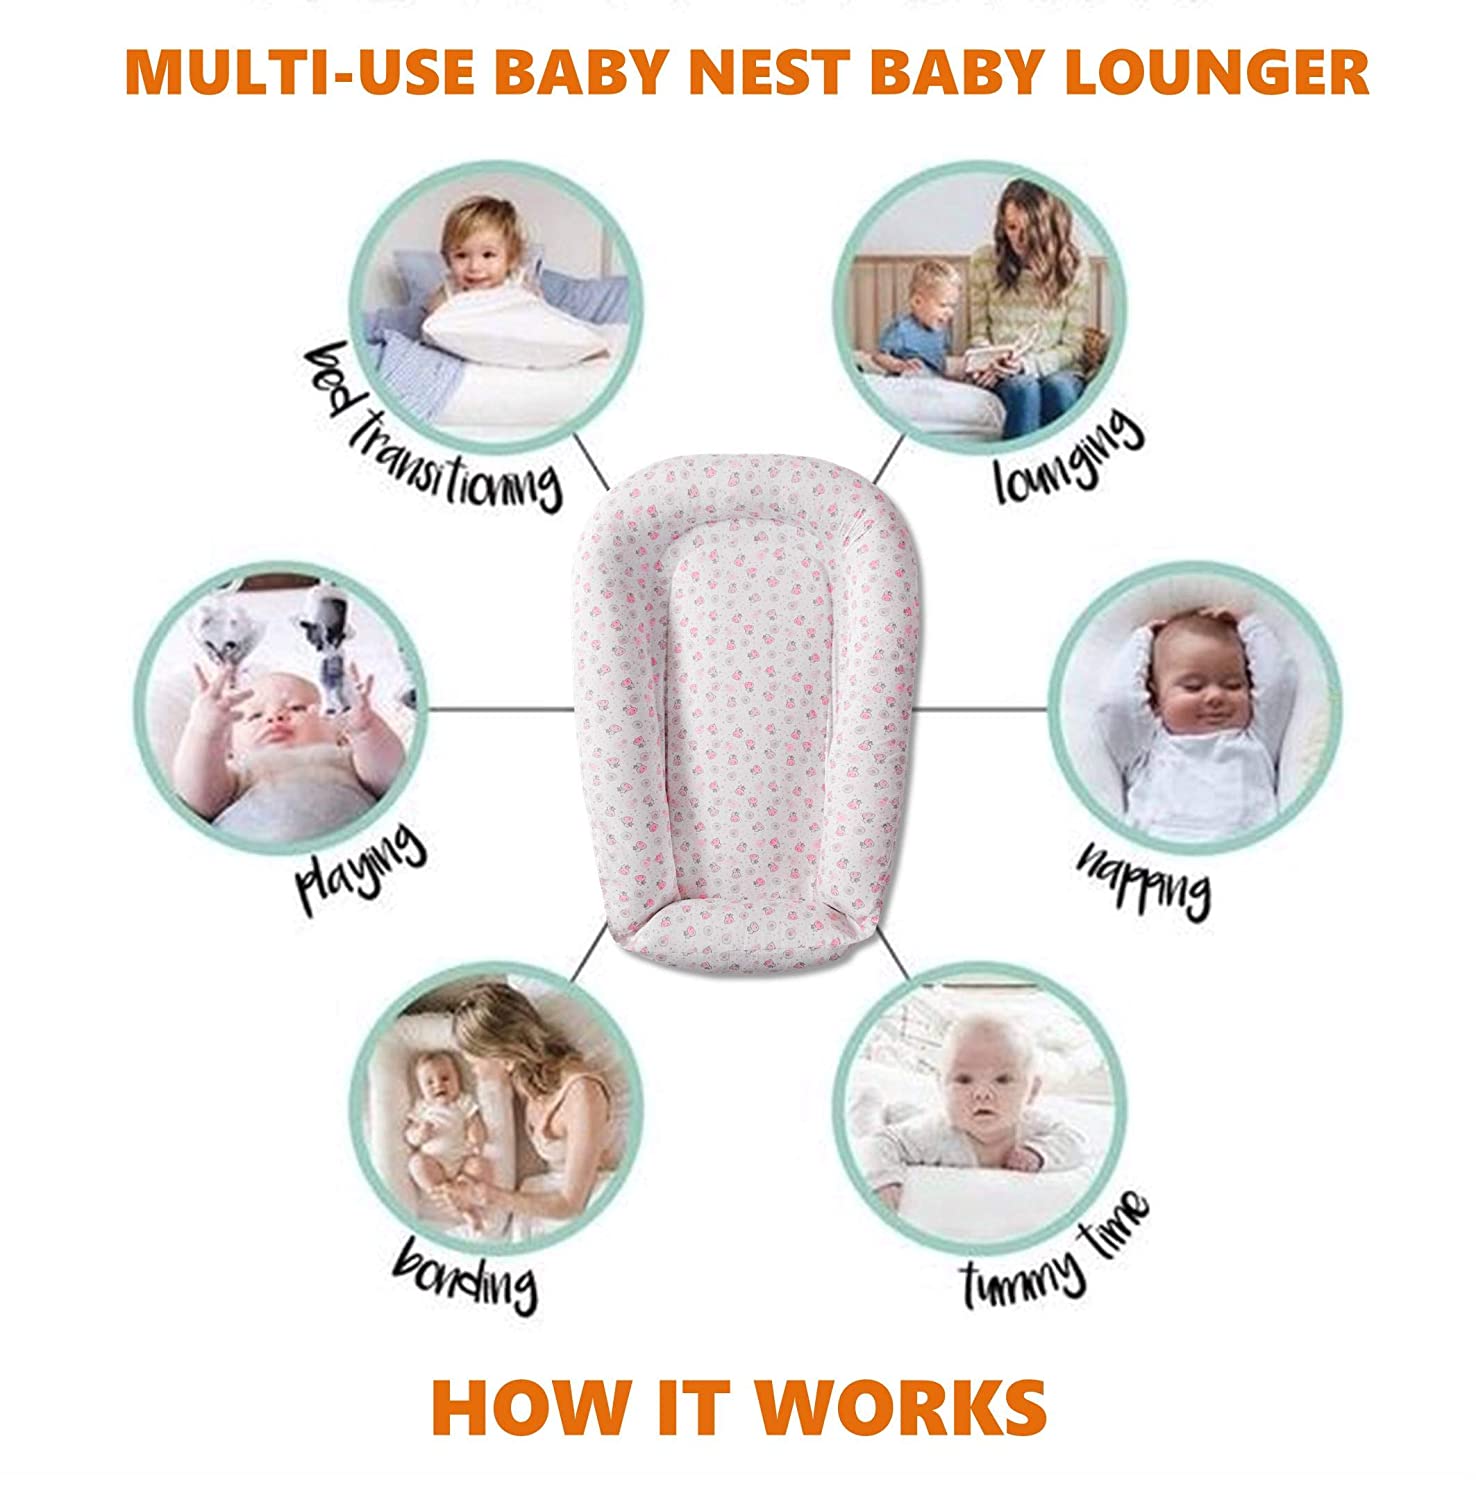 Baby Lounger - Baby Nest Co Sleeper for Baby Bed, Soft